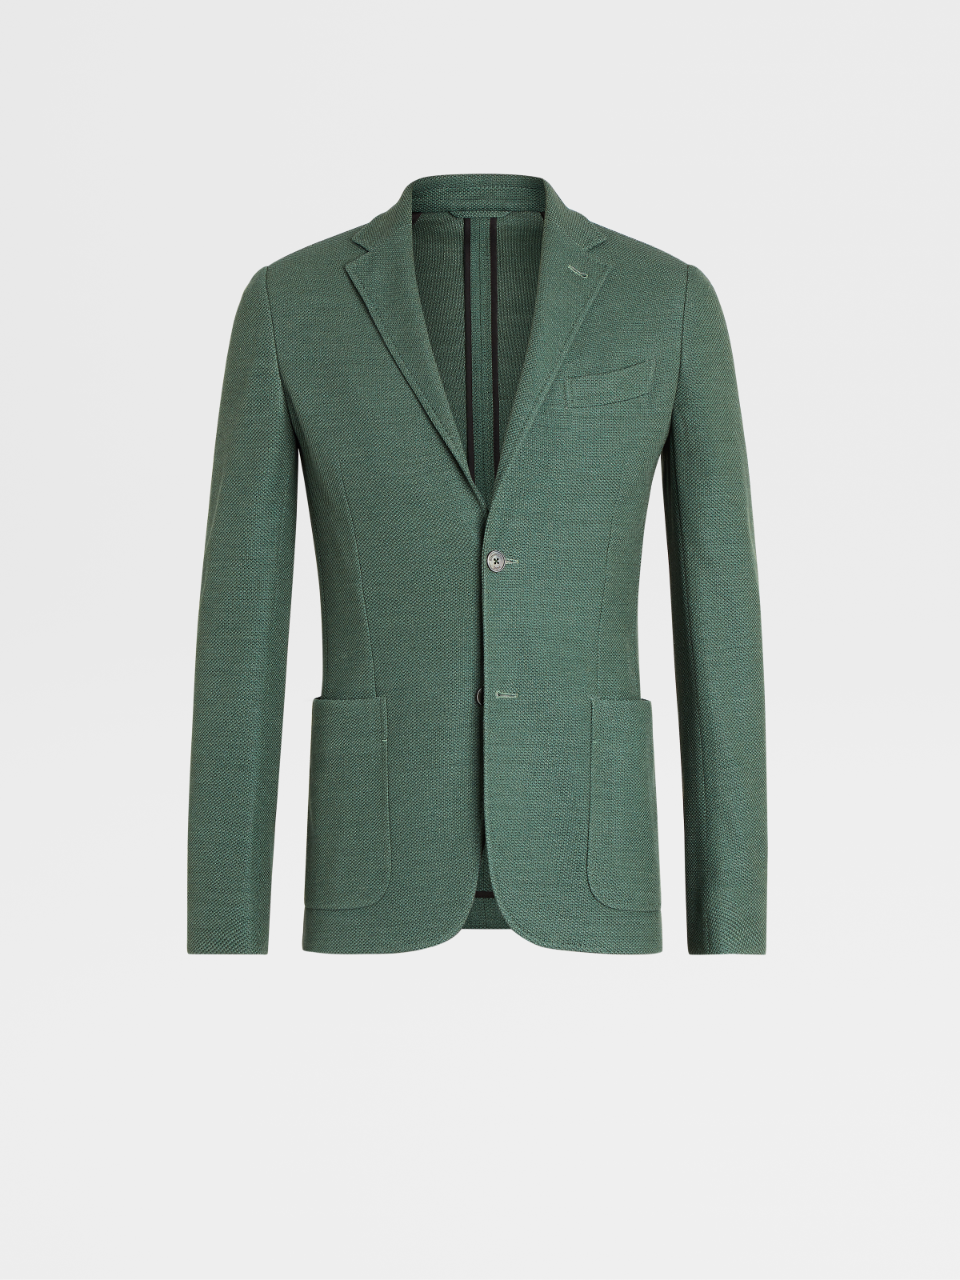 Green Silk Linen and Wool Crossover Jersey Shirt Jacket, Slim Fit